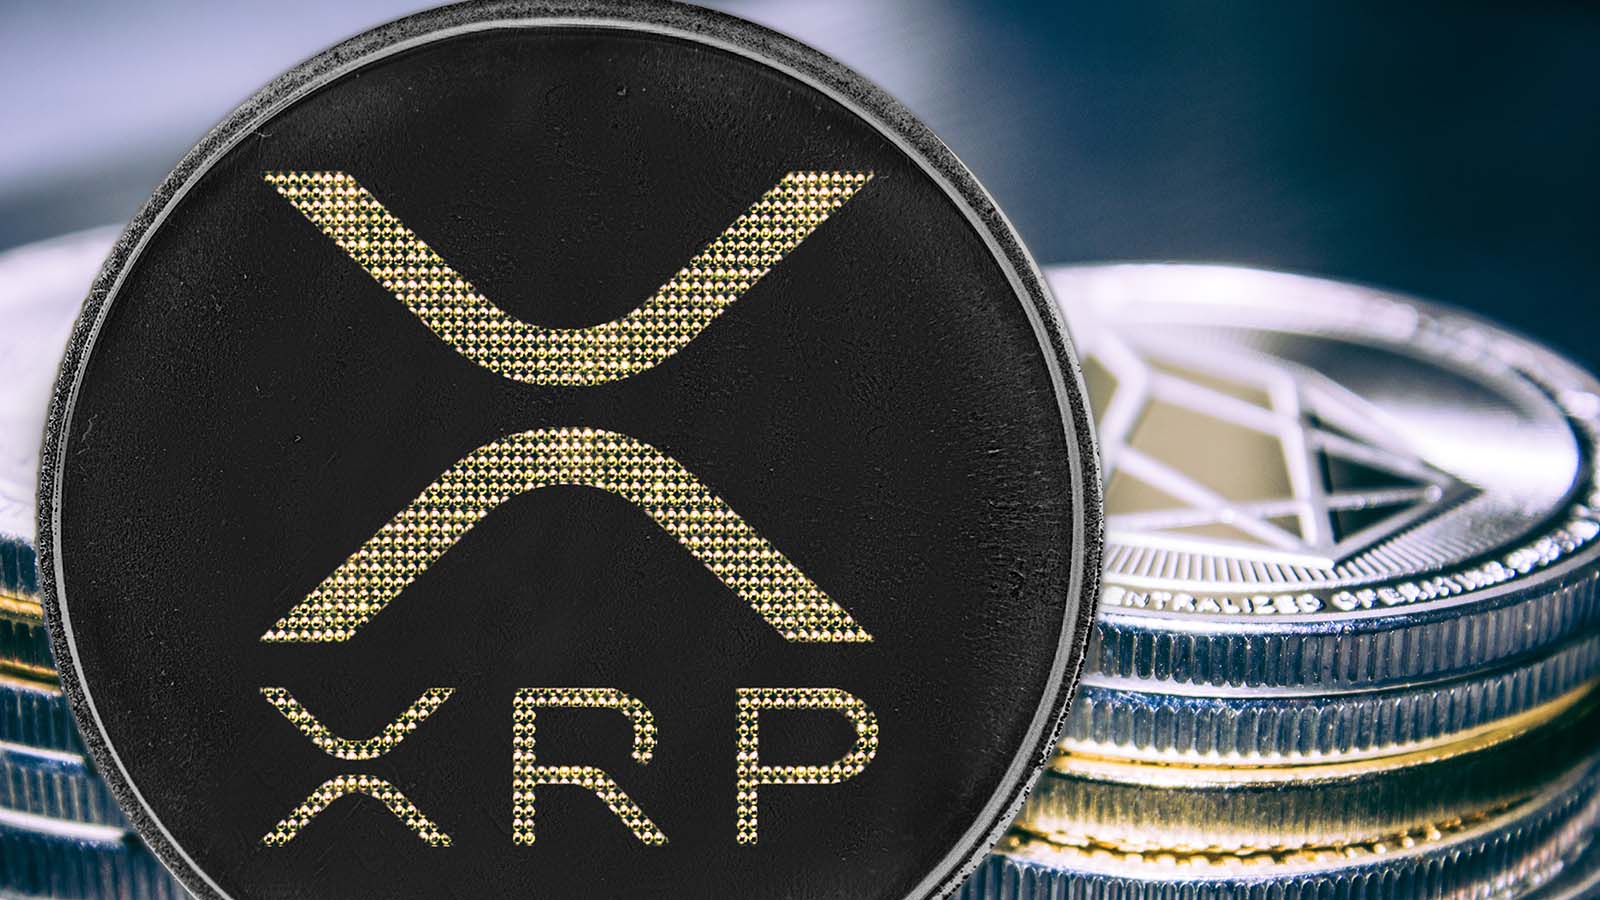 XRP Price Mania over “Airdrop” Could Drive XRP Up 300%. Time to Buy? | InvestorPlace